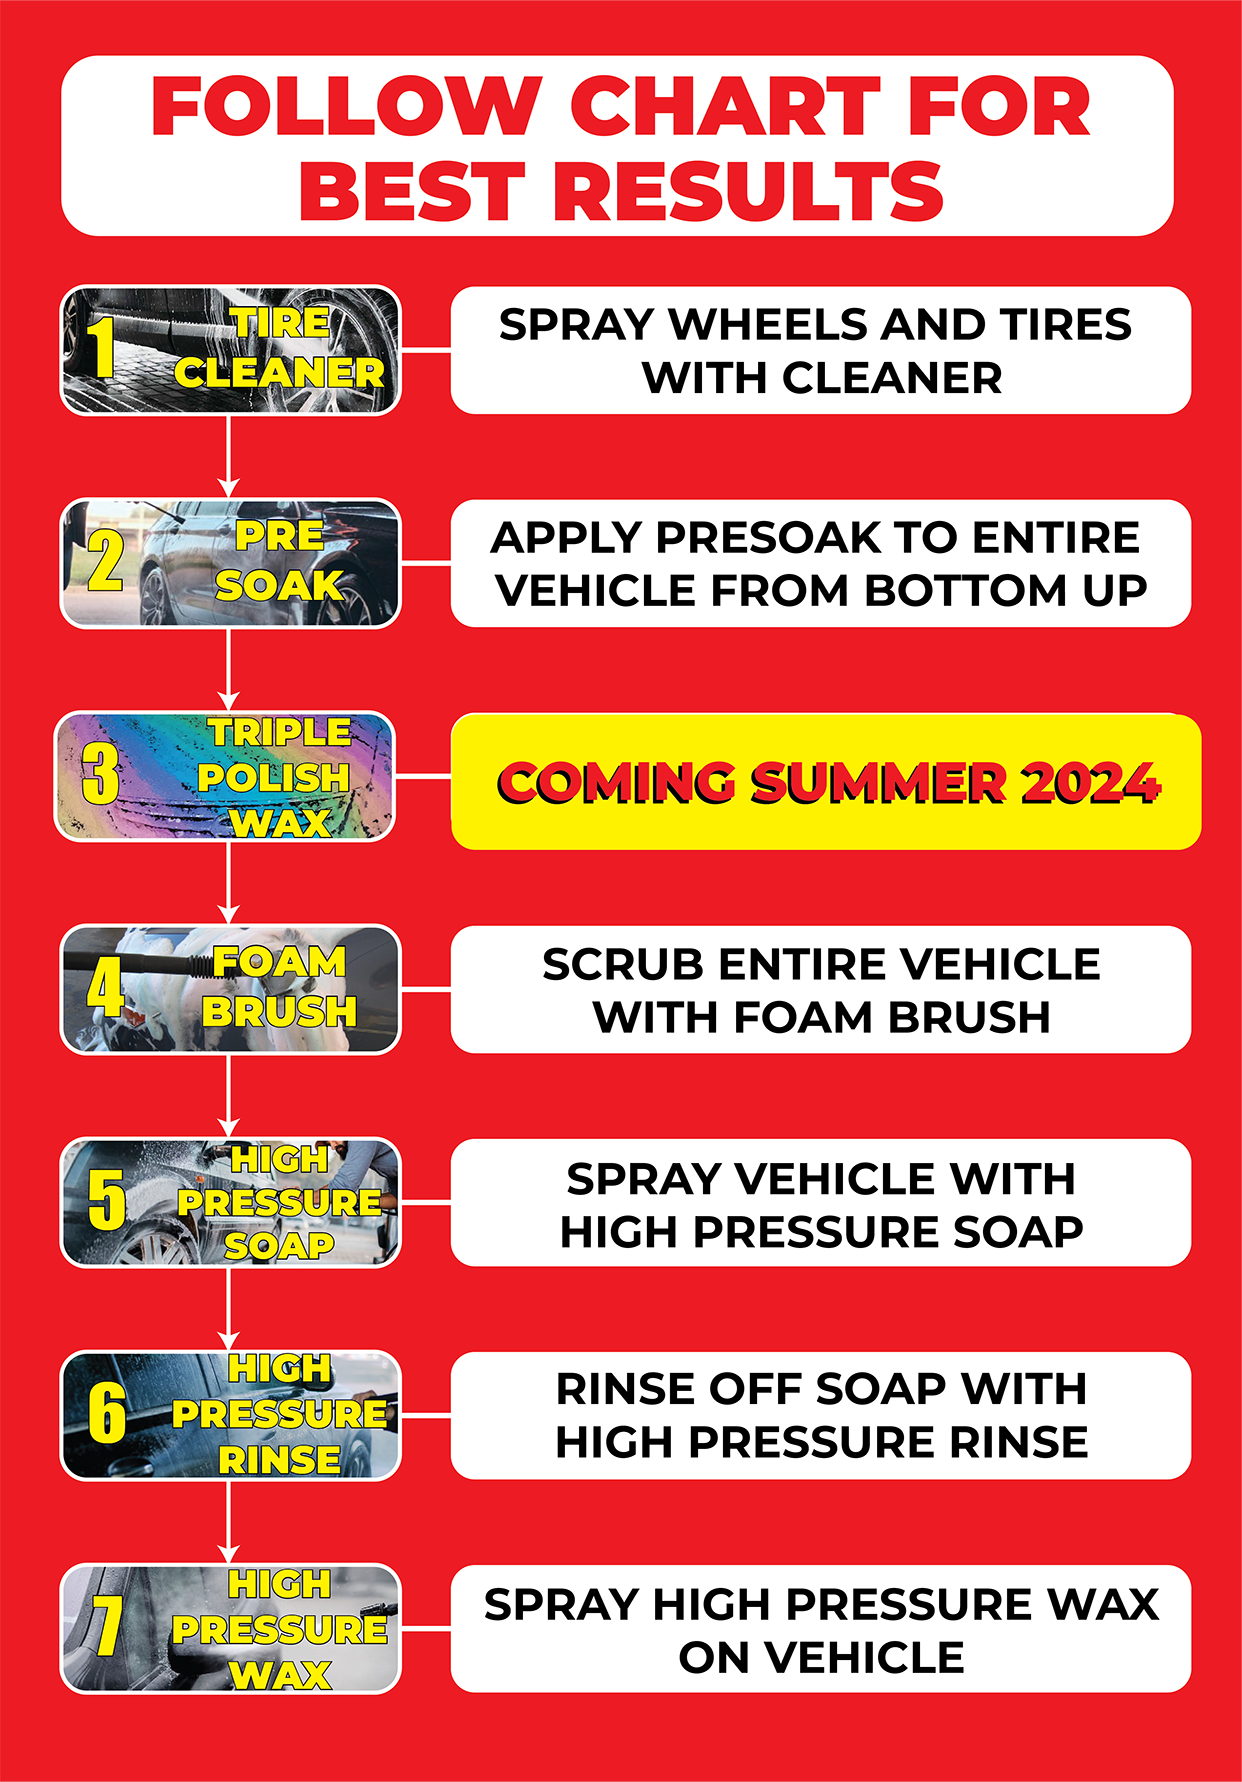 Step by Step guide to washing a car at north street self serve car wash Uxbridge.